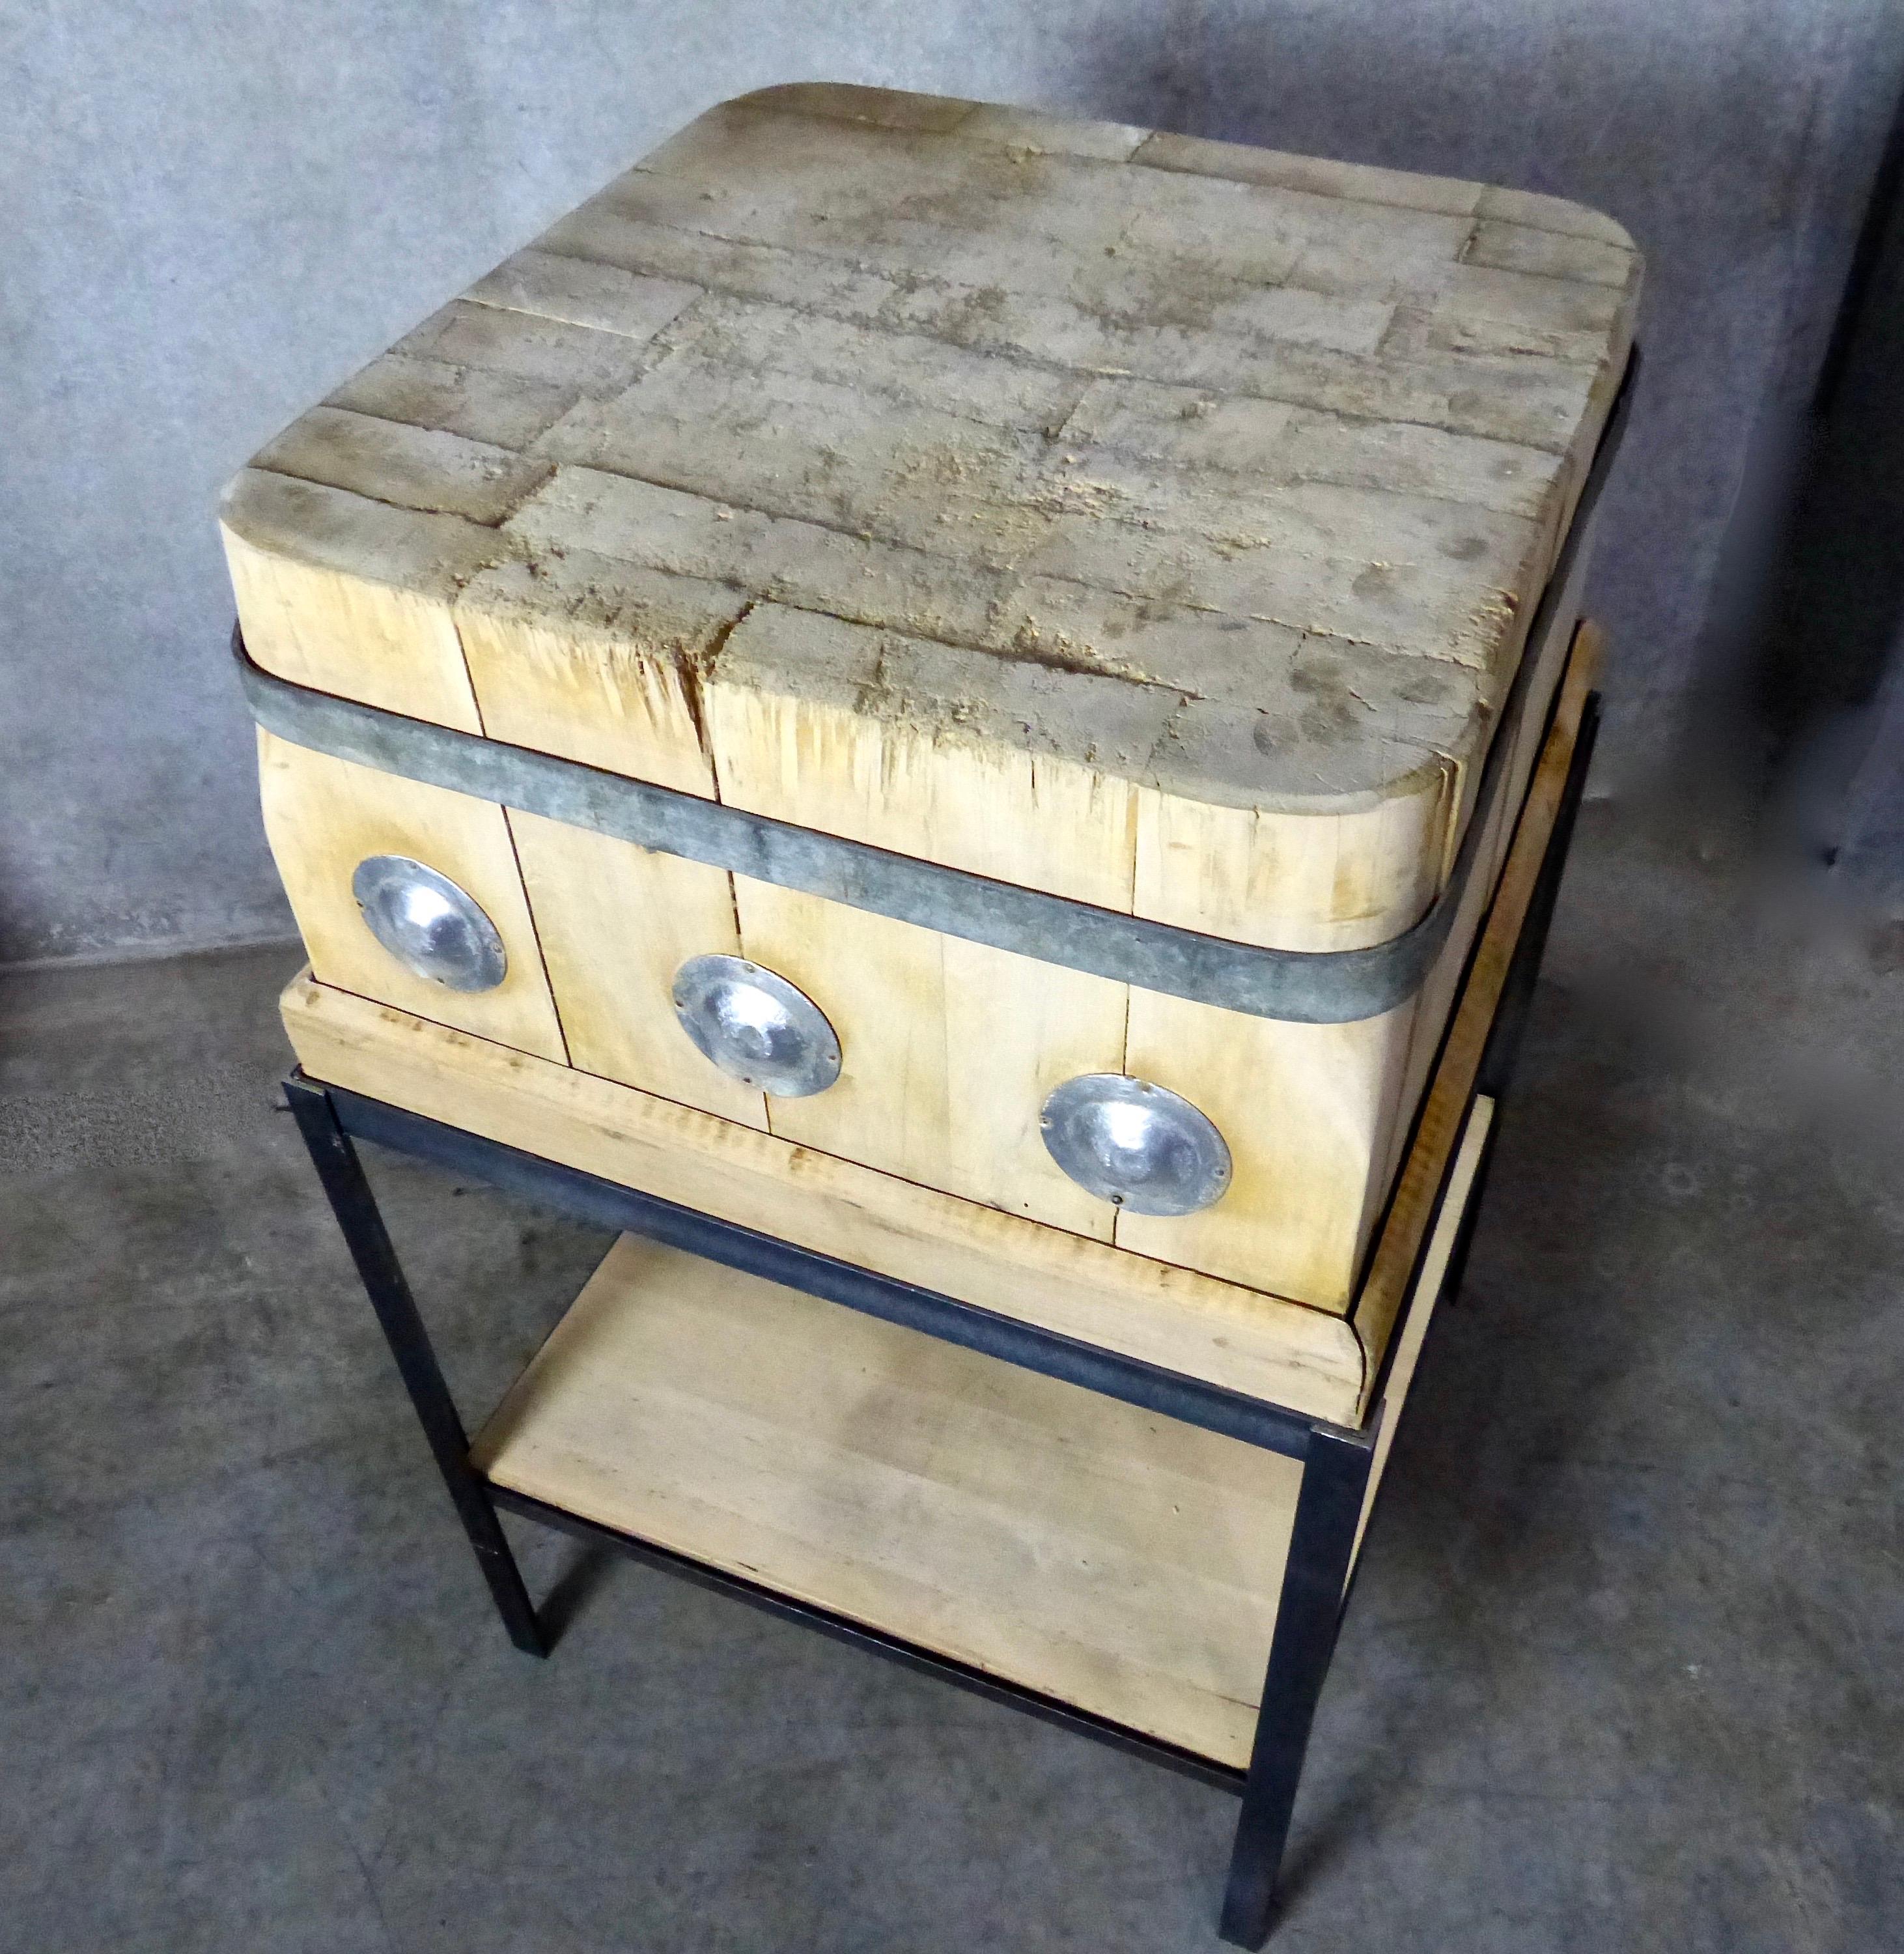 A wonderfully aged butcher block, circa 1900 and made from maple wood, that has been mounted on a bespoke steel base. Original circular metal medallions and metal strapping. Includes a lower shelf made from reclaimed wood. Great accent piece for a